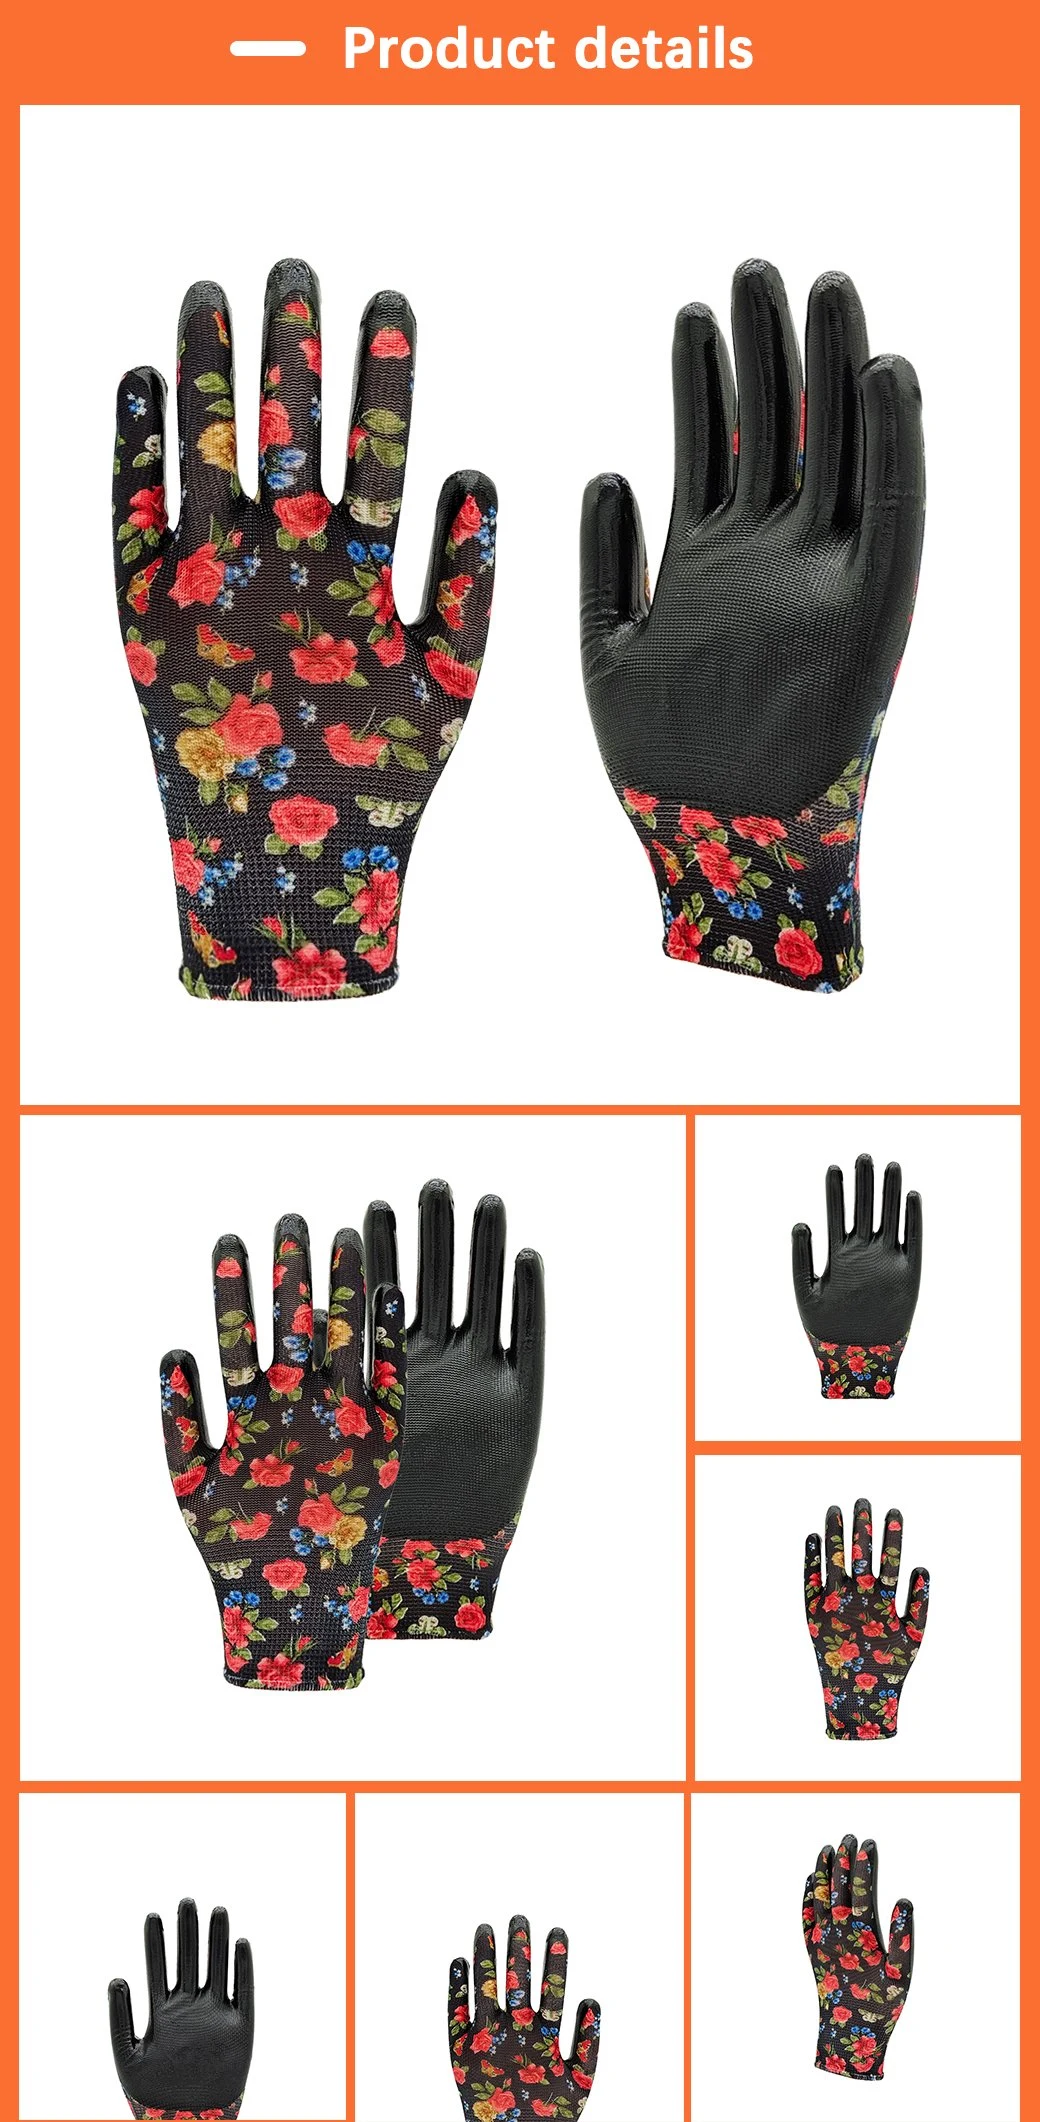 Factoryshop Design Flower Liner Garden Nitrile Palm Coated Collection Gardening Stretchy Protective Work Safety Gloves for Women / Female / Kids